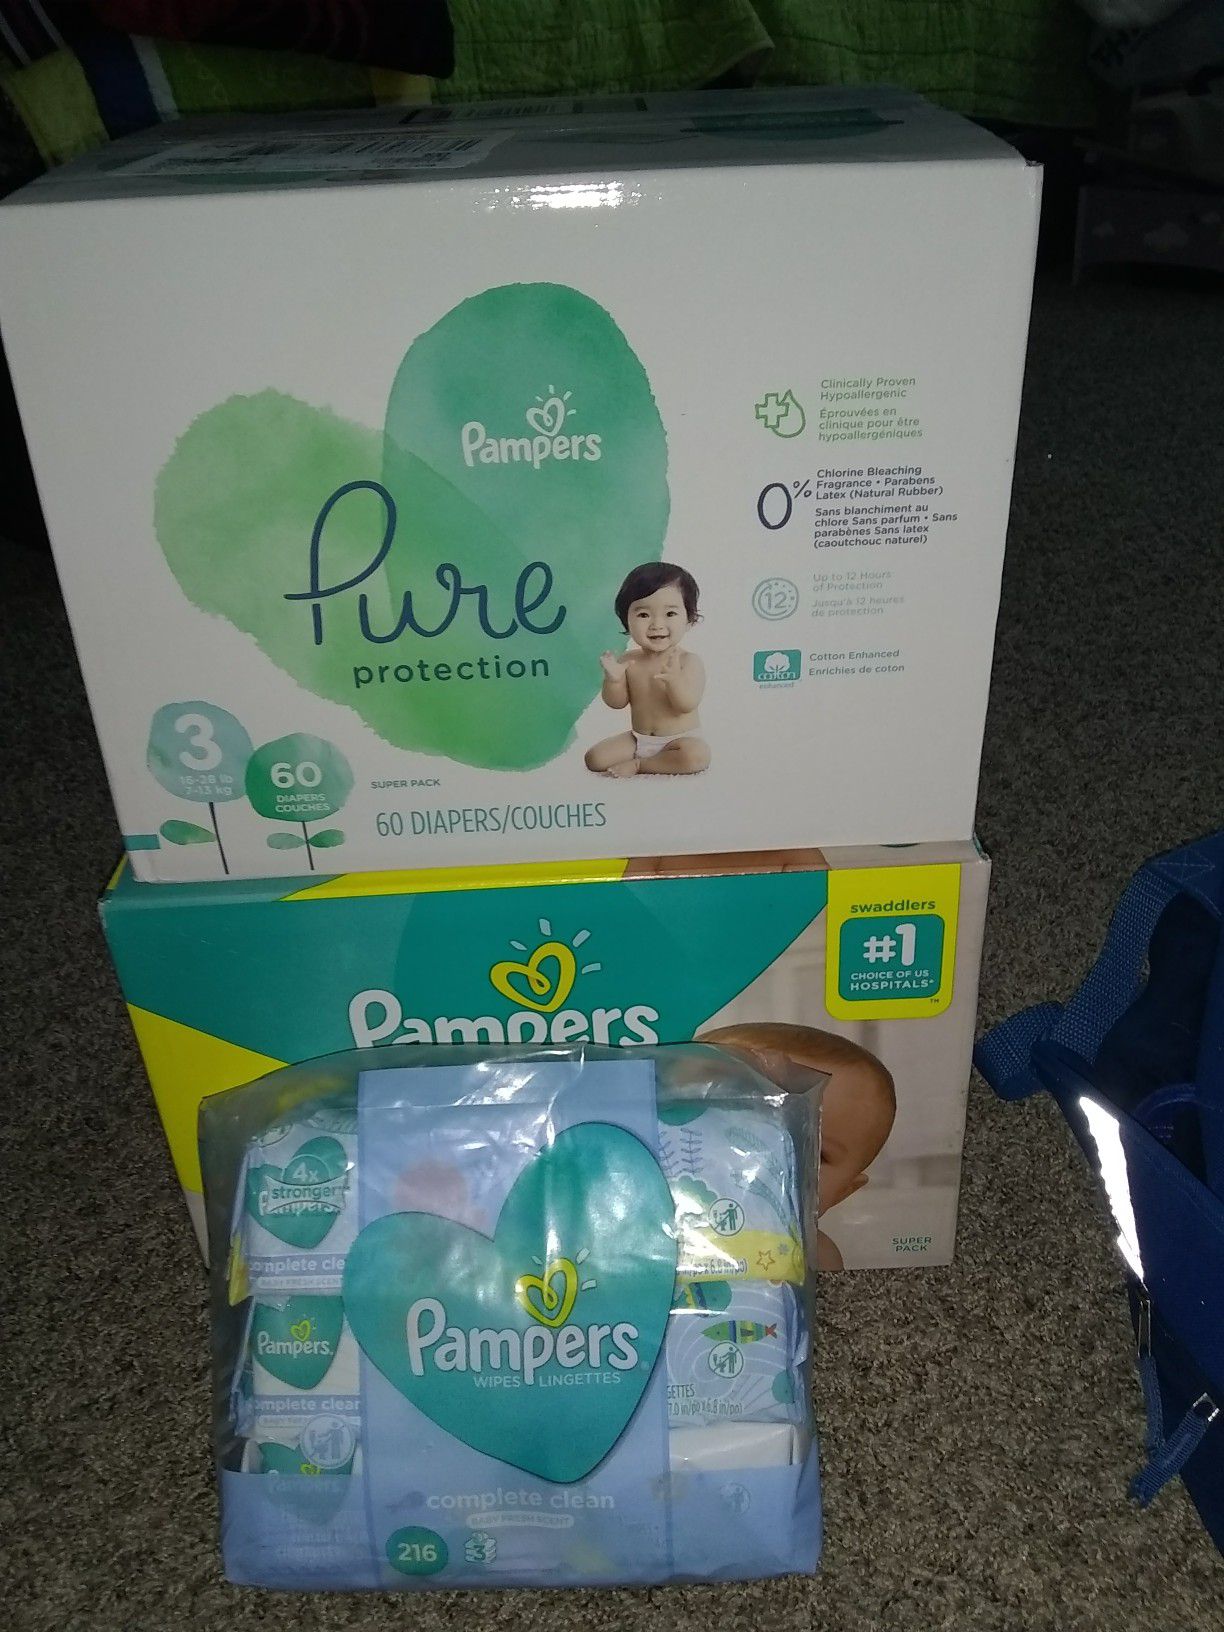 Pampers puré protection and Pampers swaddlers, wipes